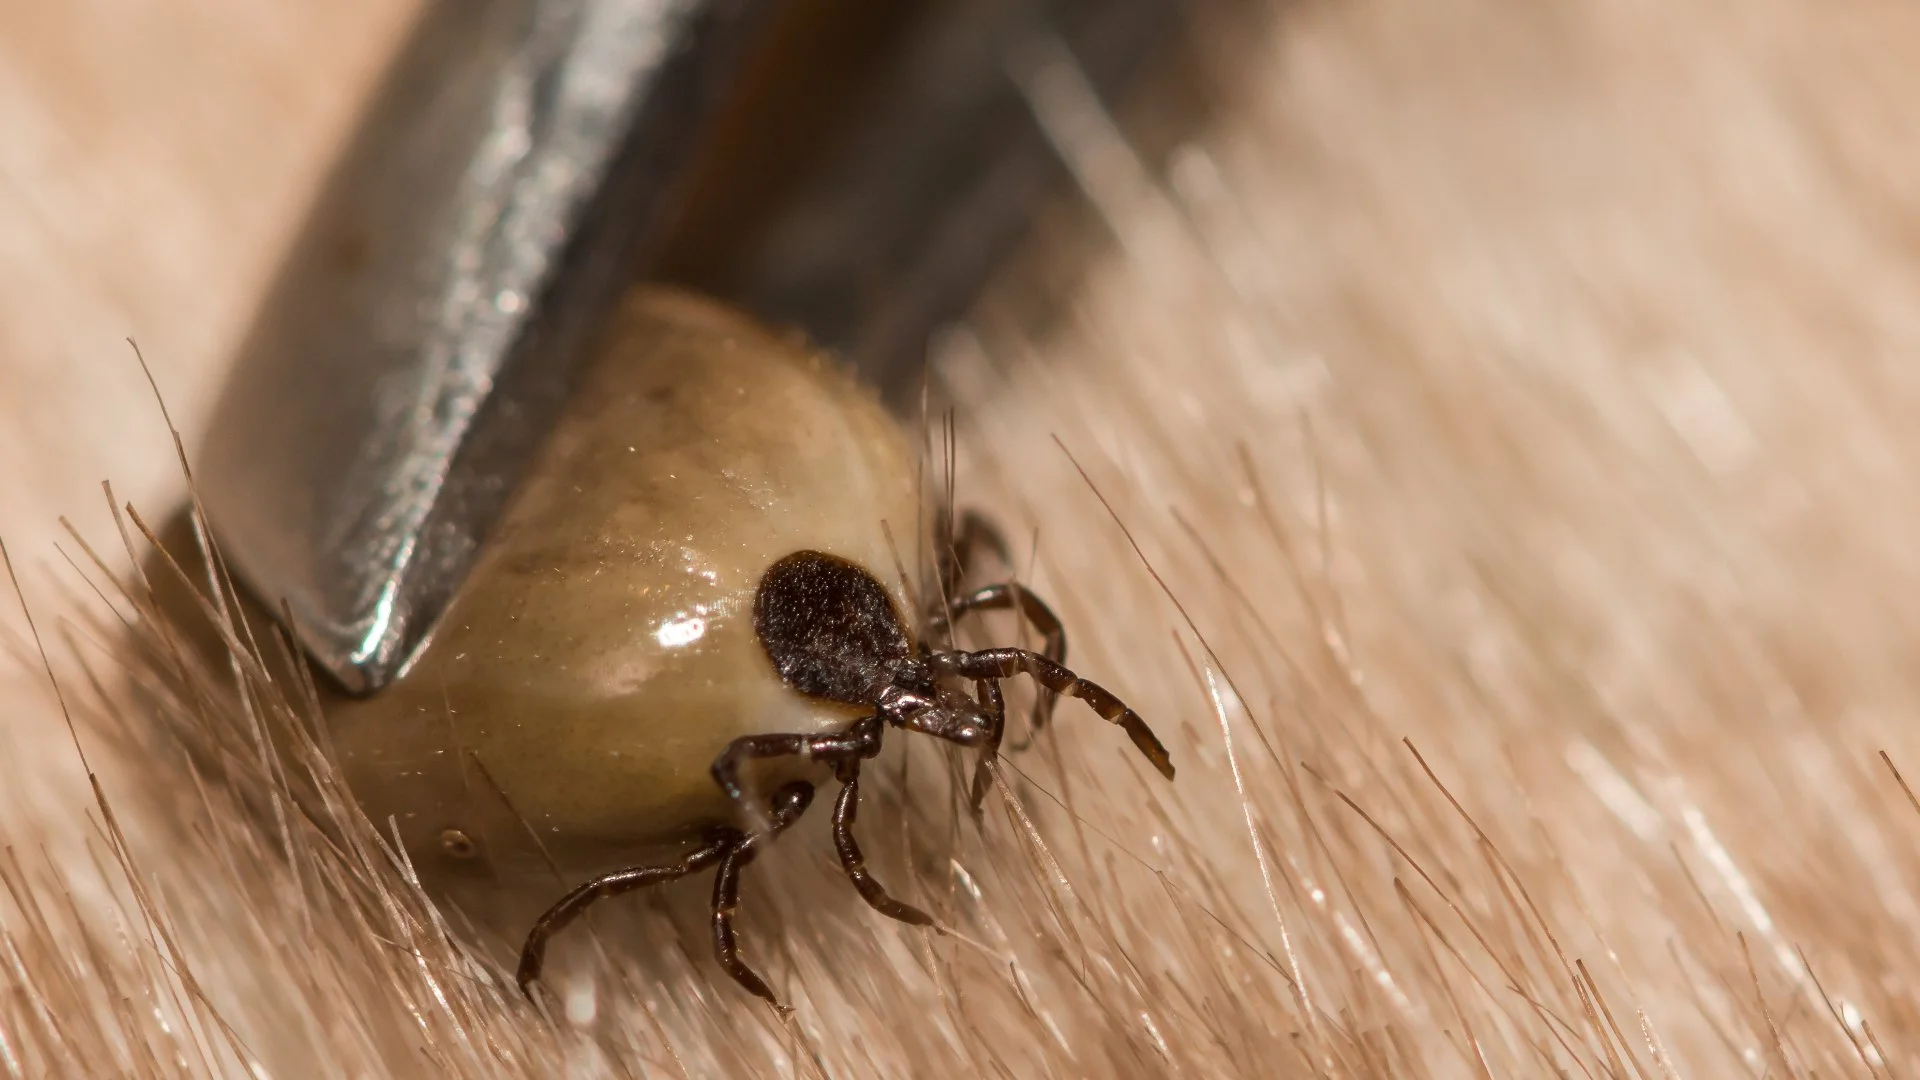 Tick Season Has Arrived - How to Protect Yourself From Ticks